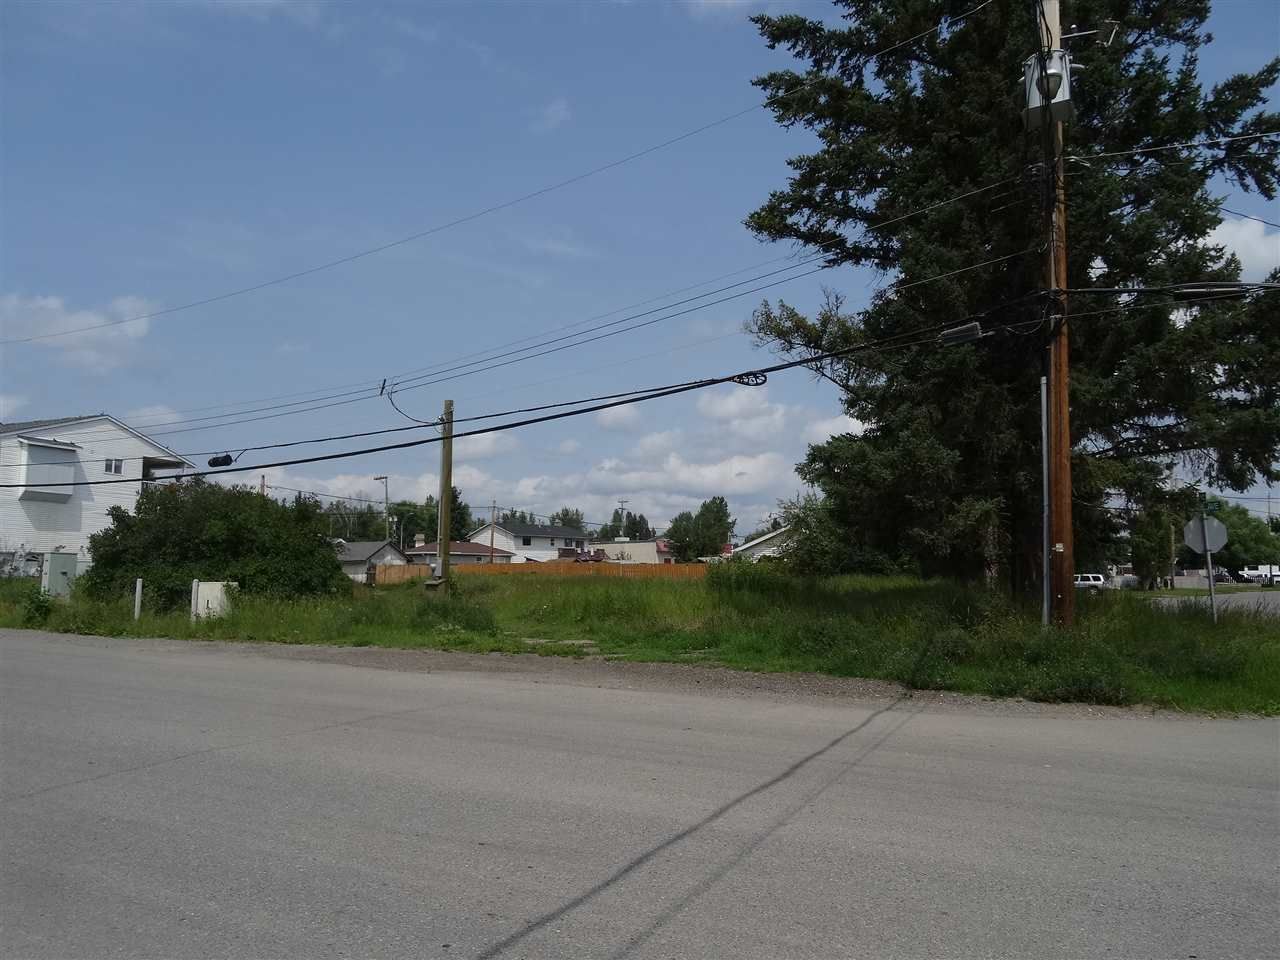 Main Photo: 605 WADE AVENUE in : Quesnel - Town Land for sale : MLS®# R2386036